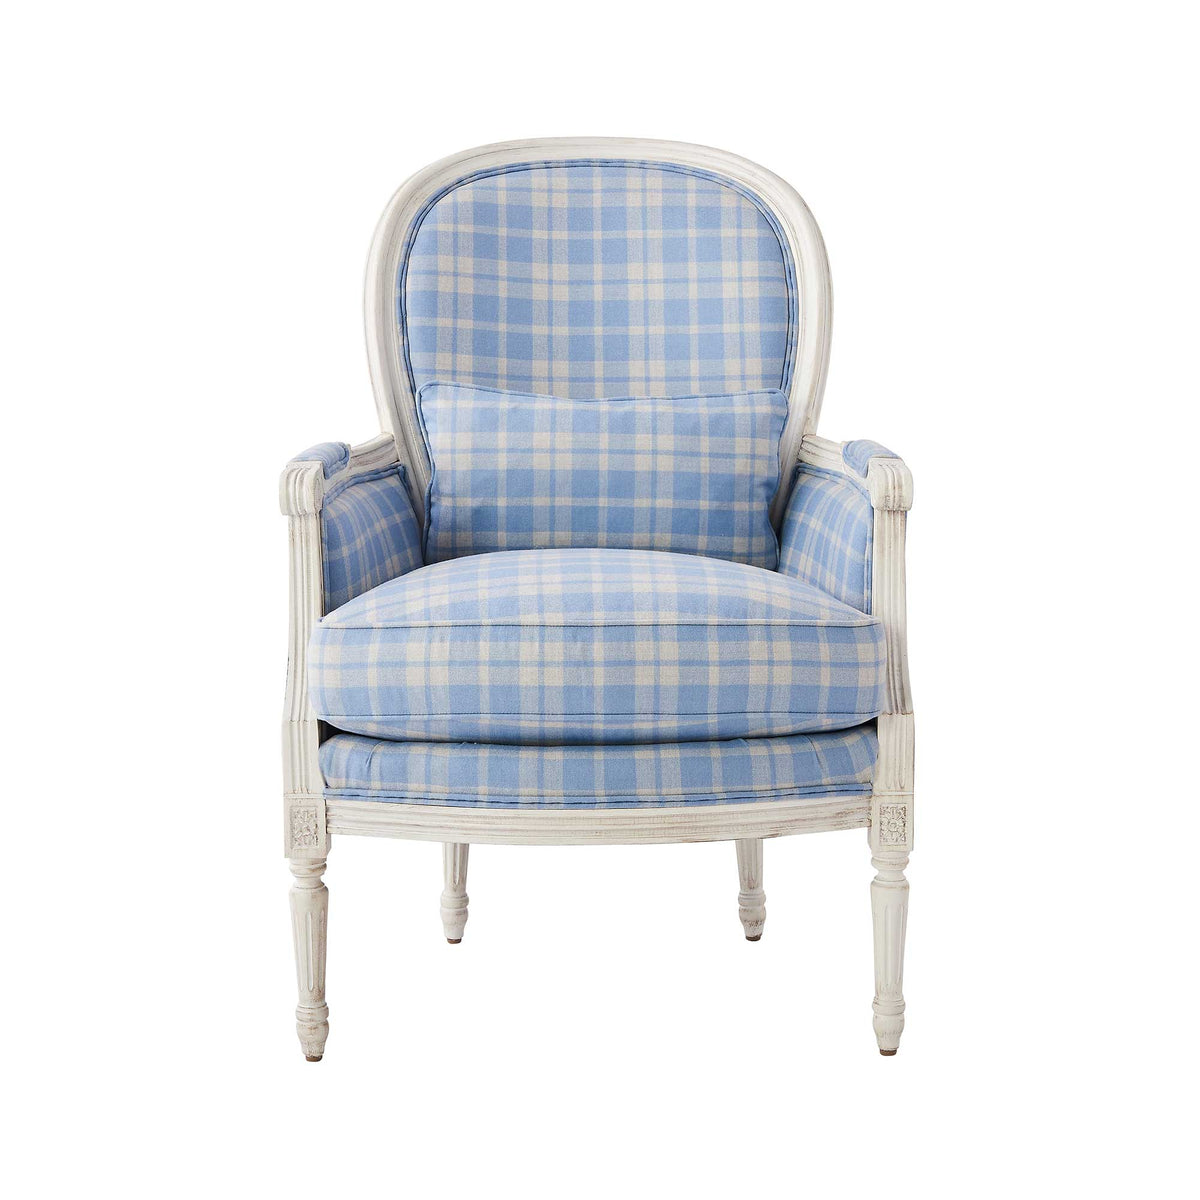 Blue Plaid Adele Upholstered Lounge Chair